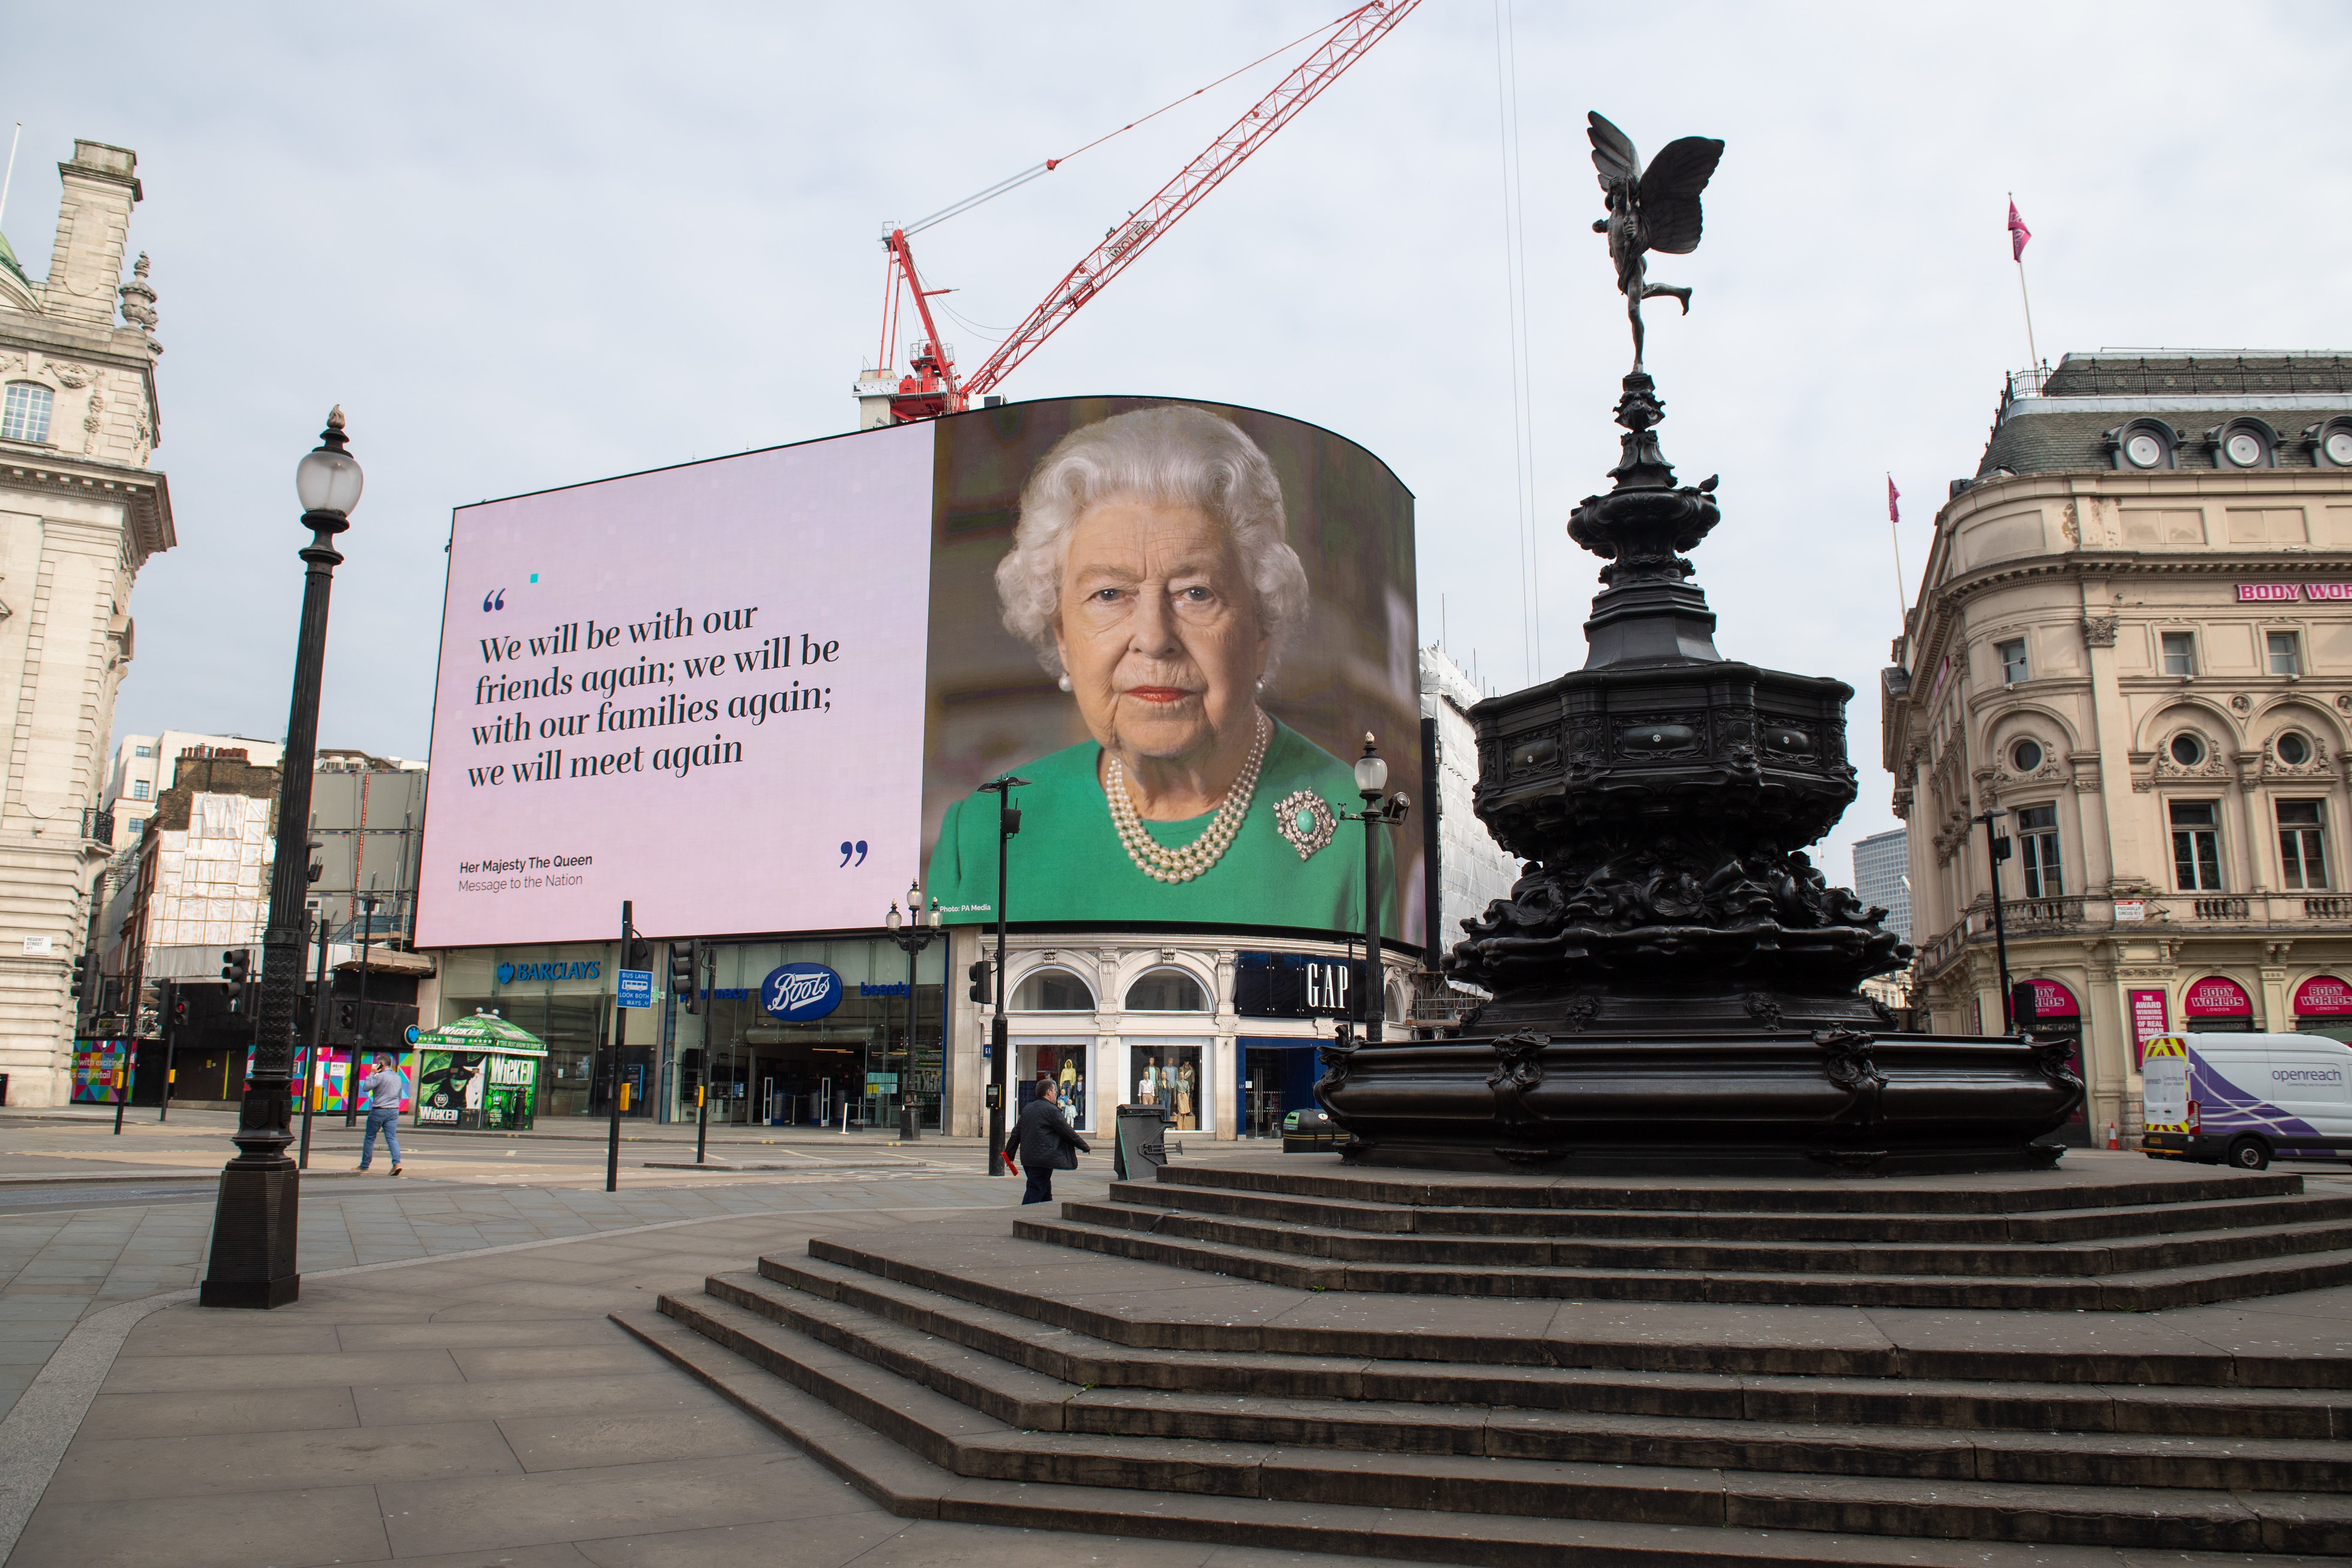 Words from the Queen’s televised address during the coronavirus pandemic up in lights at London’s Piccadilly Circus (Dominic Lipinski/PA)